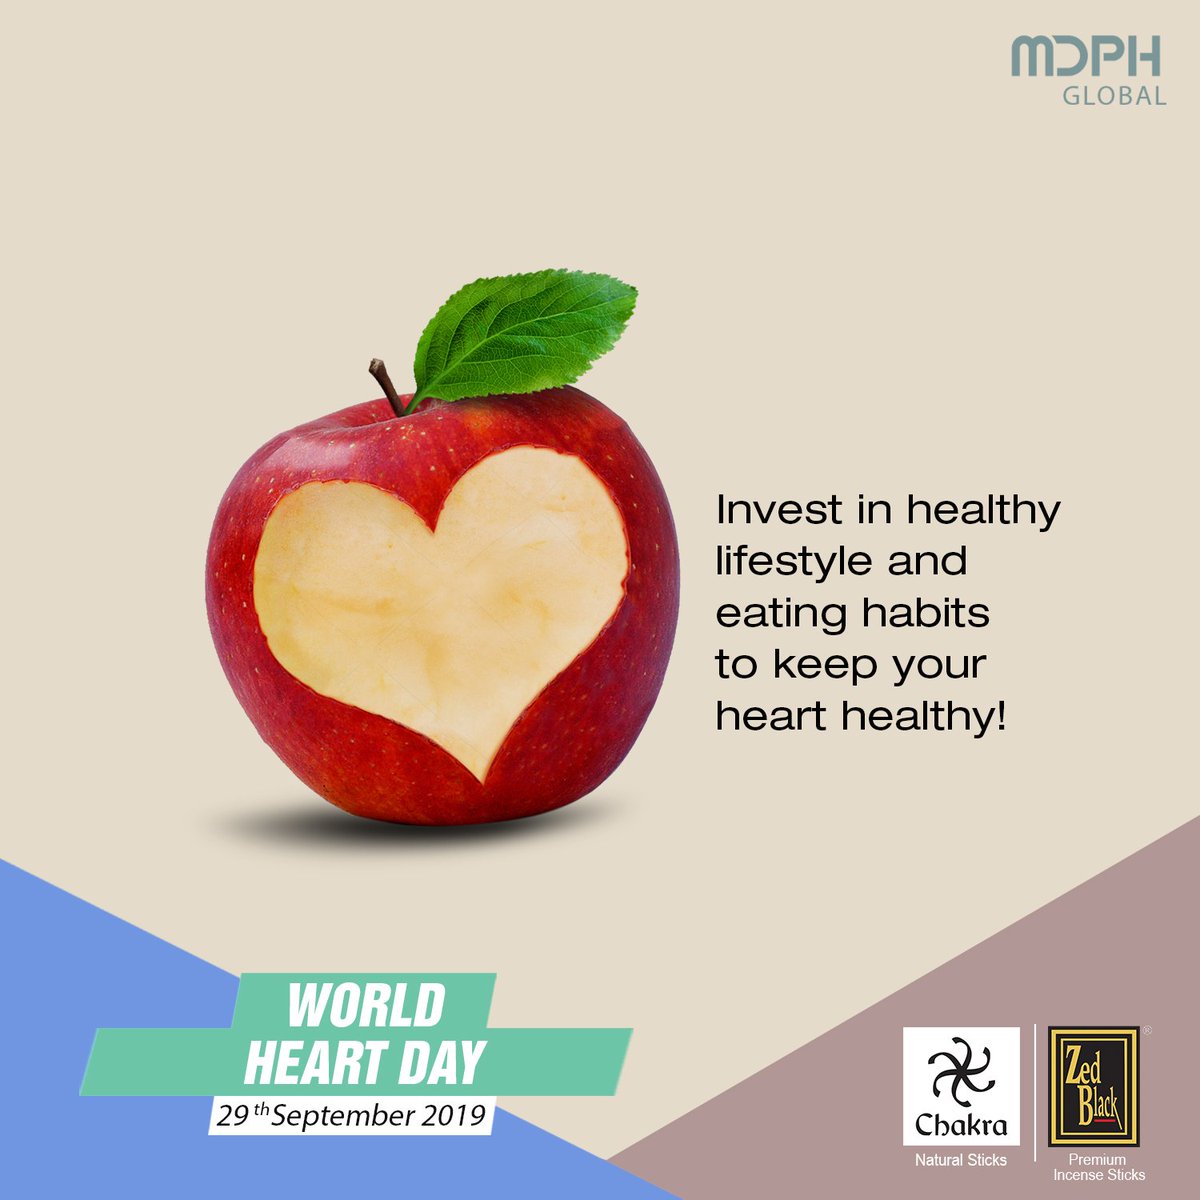 Healthy habits leads to #health filled life.

#WorldHeartDay #heart #hearthealth #healthyliving #diet #september #fitness #diabetes #life #awareness #care #medical #hospital #healthy #habits #MDPHGlobal #ZedBlack #ChakraAroma #IncenseSticks #love #happy #positivity